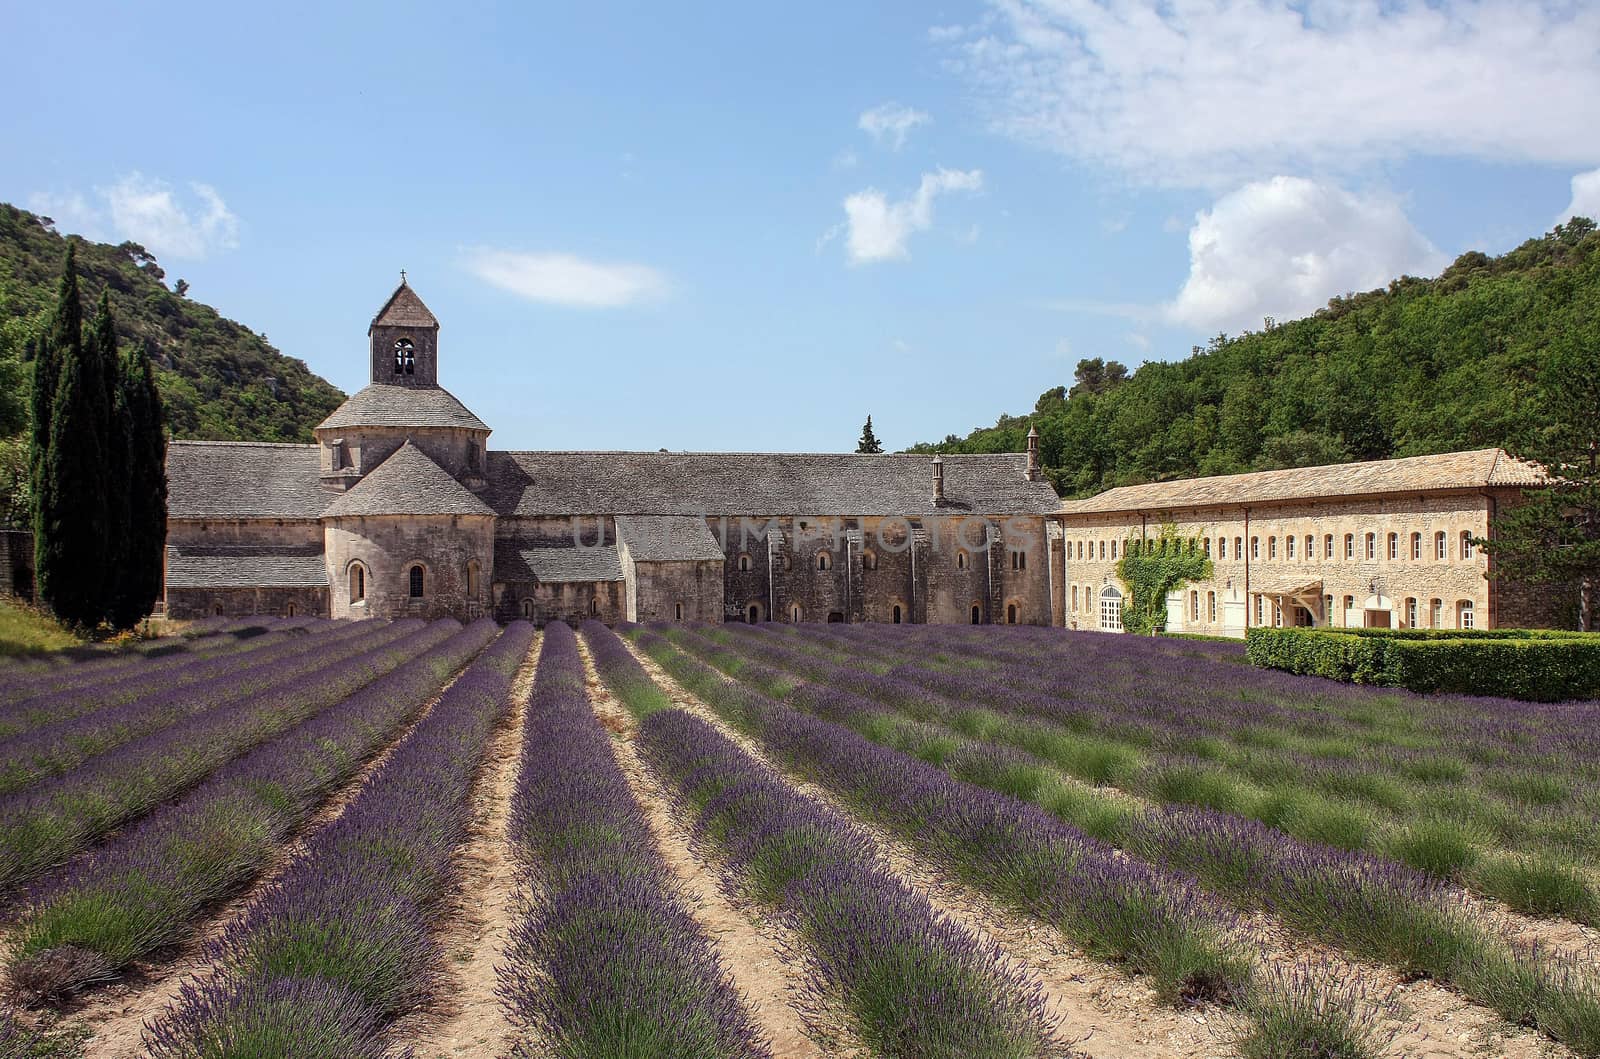 Stone abbey with lavender field in the backyard by Mag6619